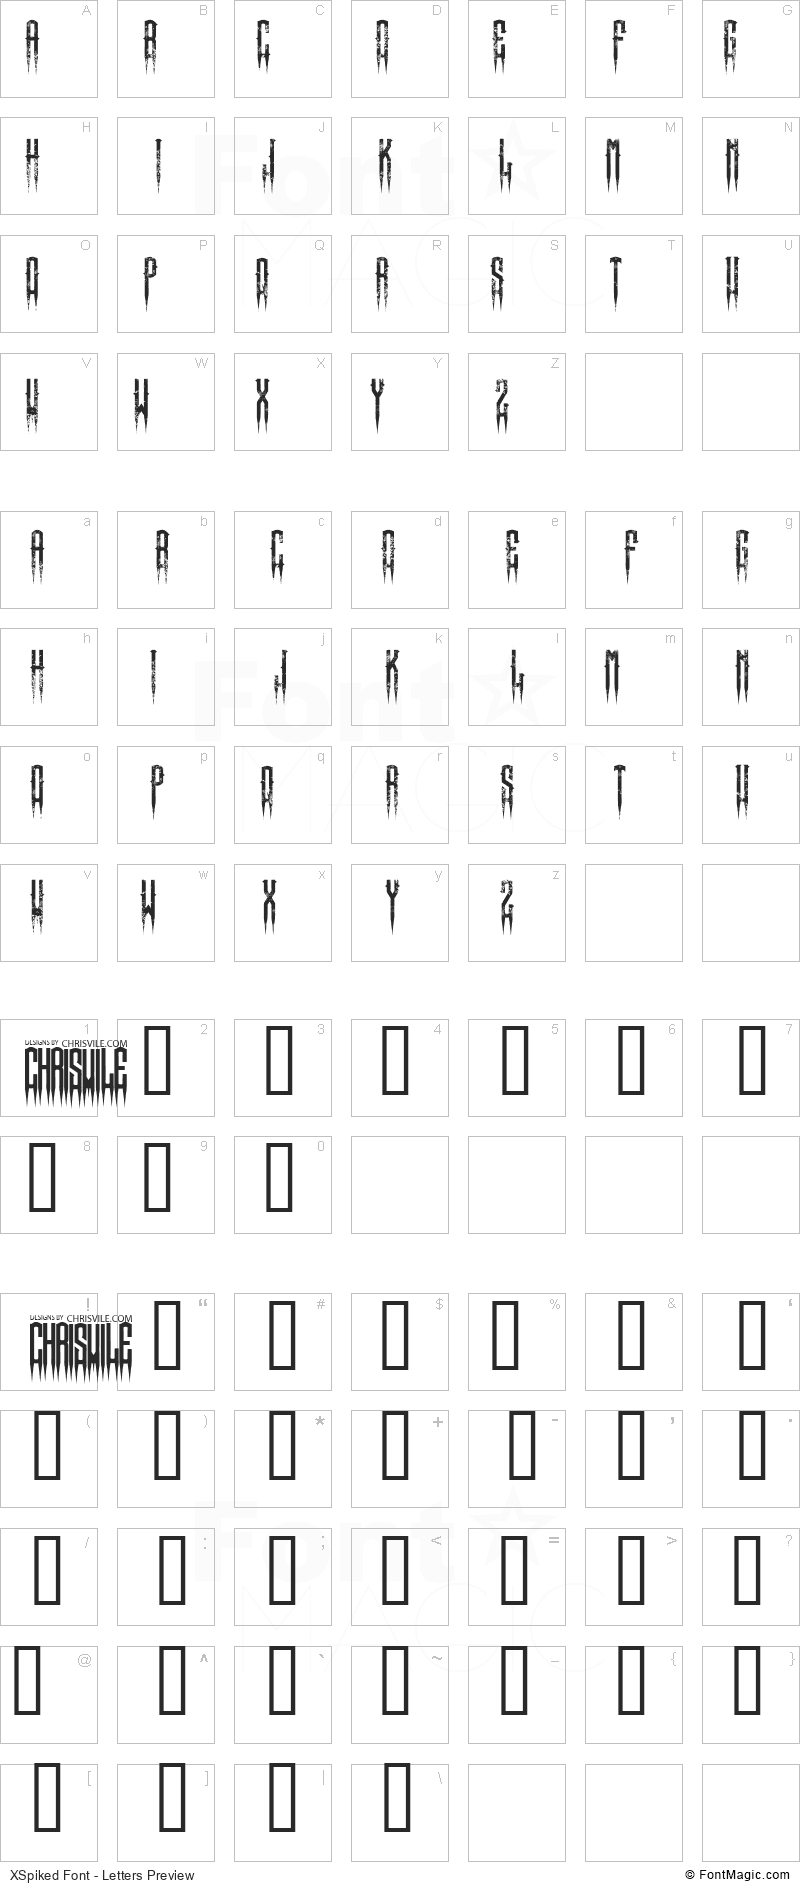 XSpiked Font - All Latters Preview Chart